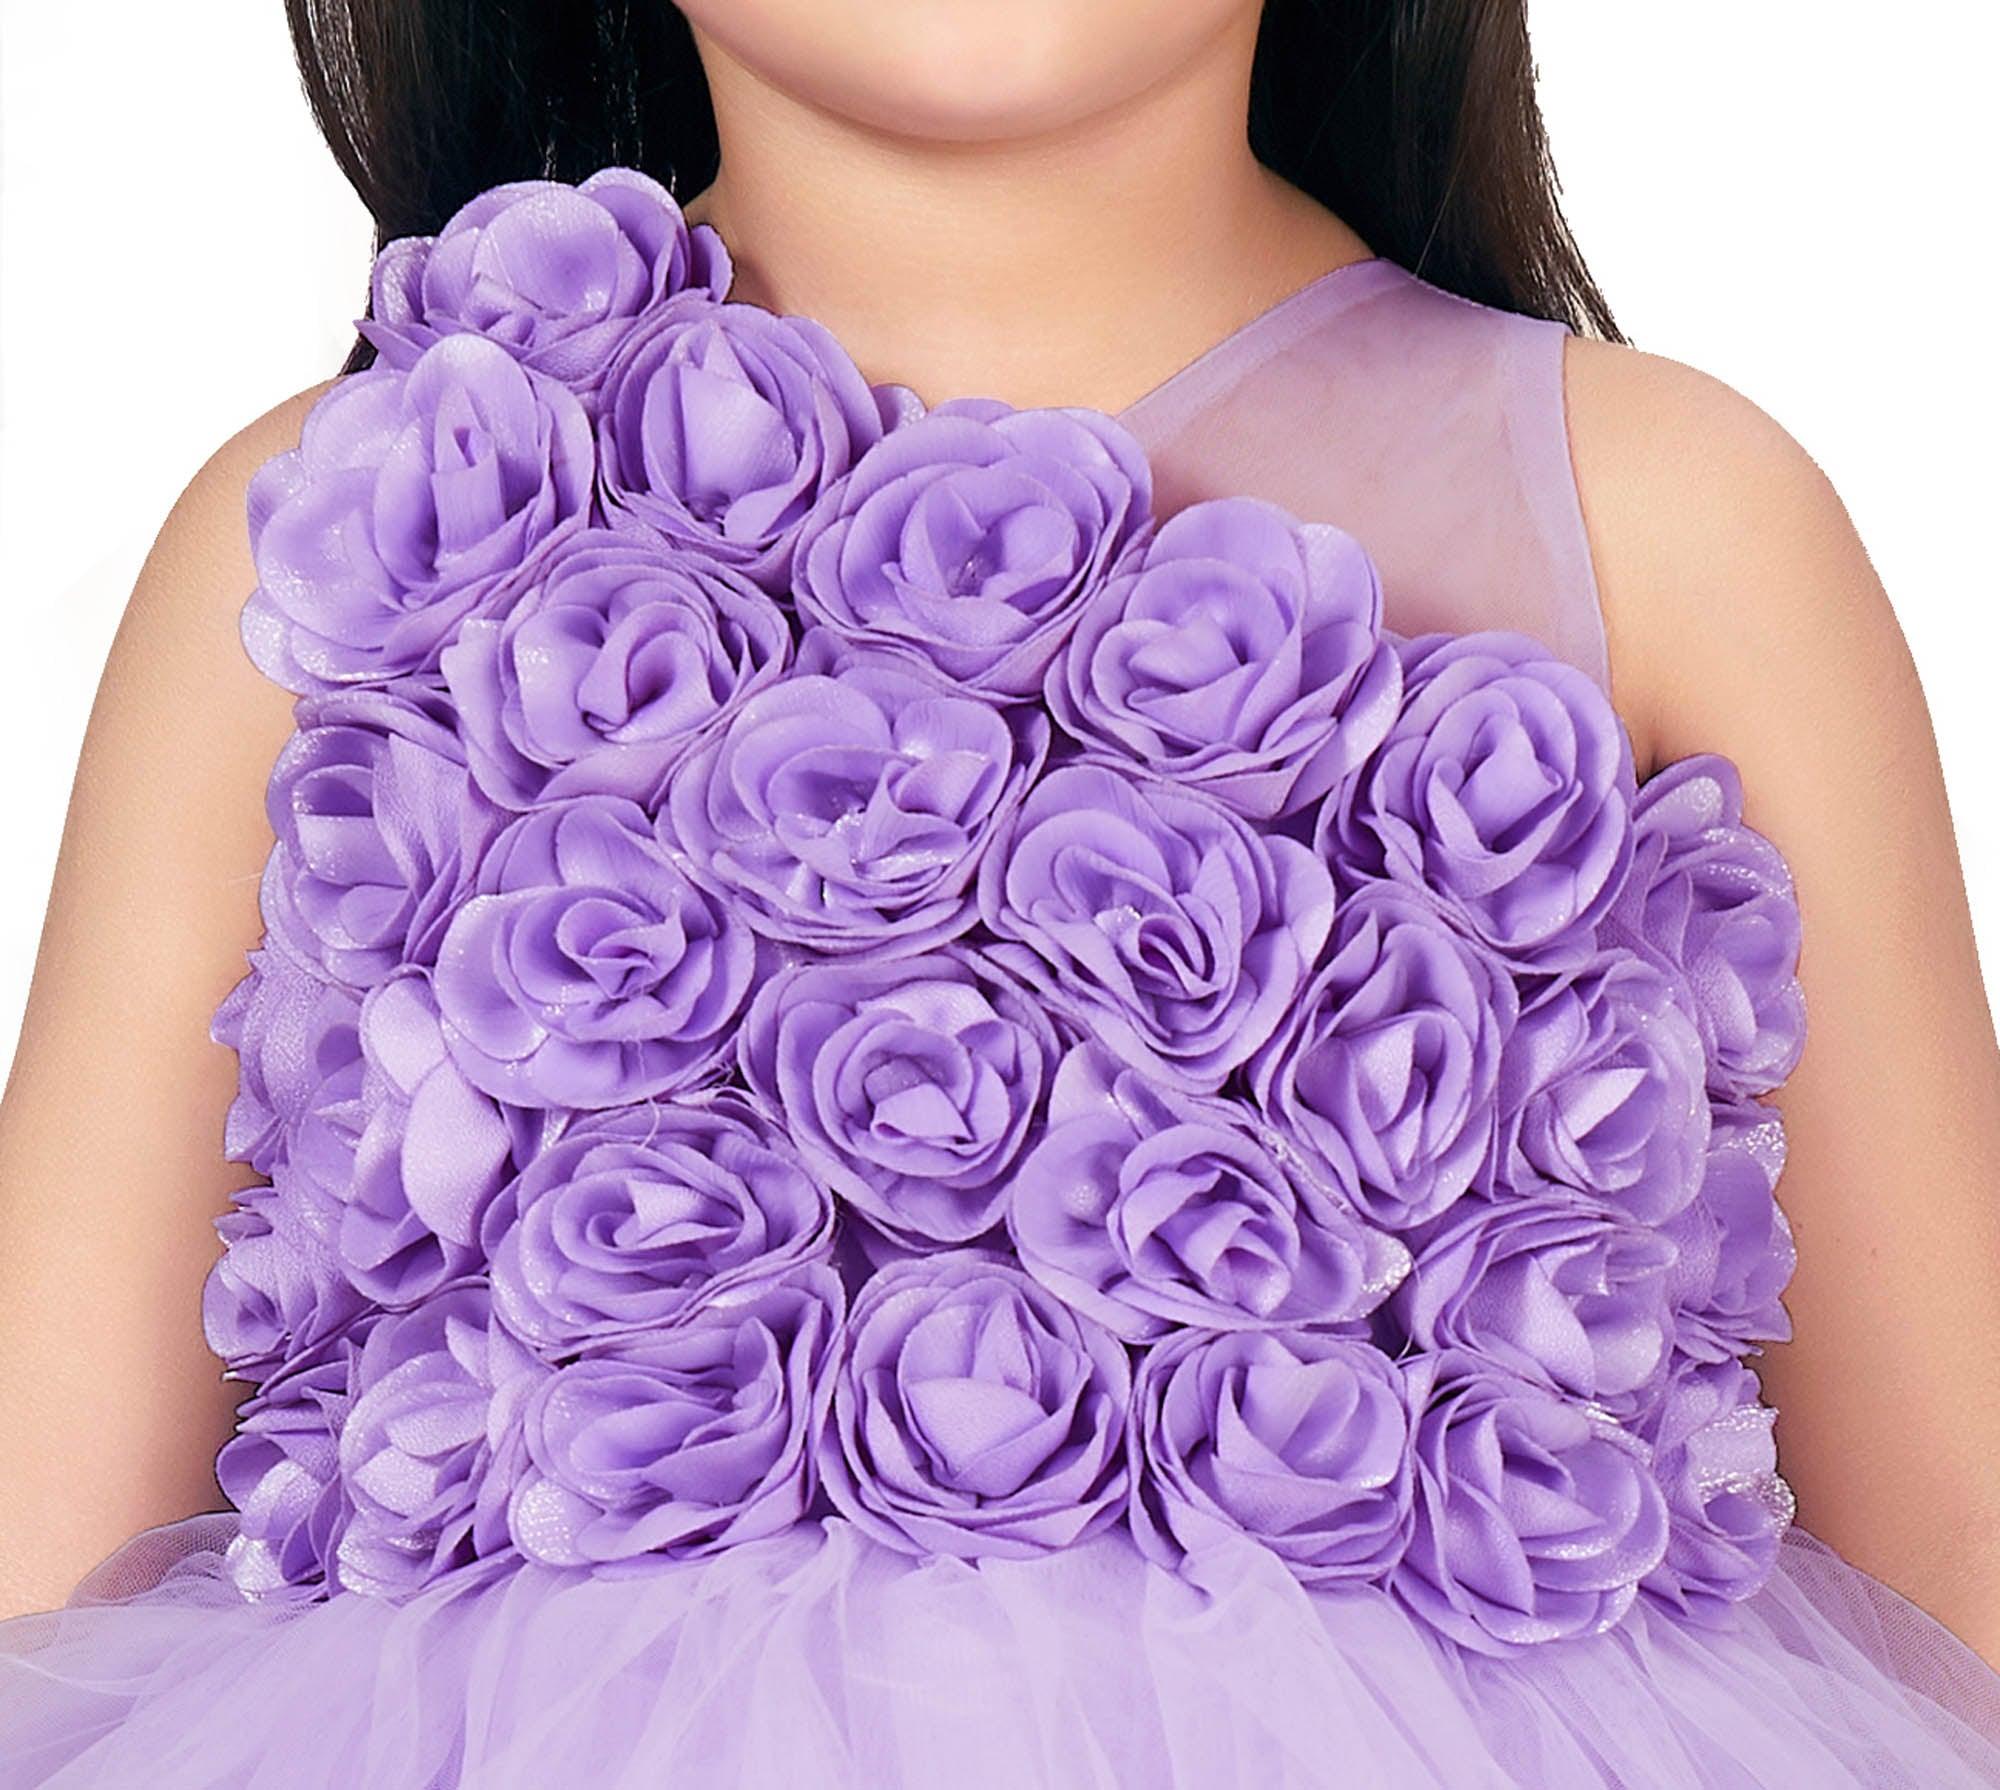 Lavender multilayered frilled gown with rose surface embellishment. - Lagorii Kids